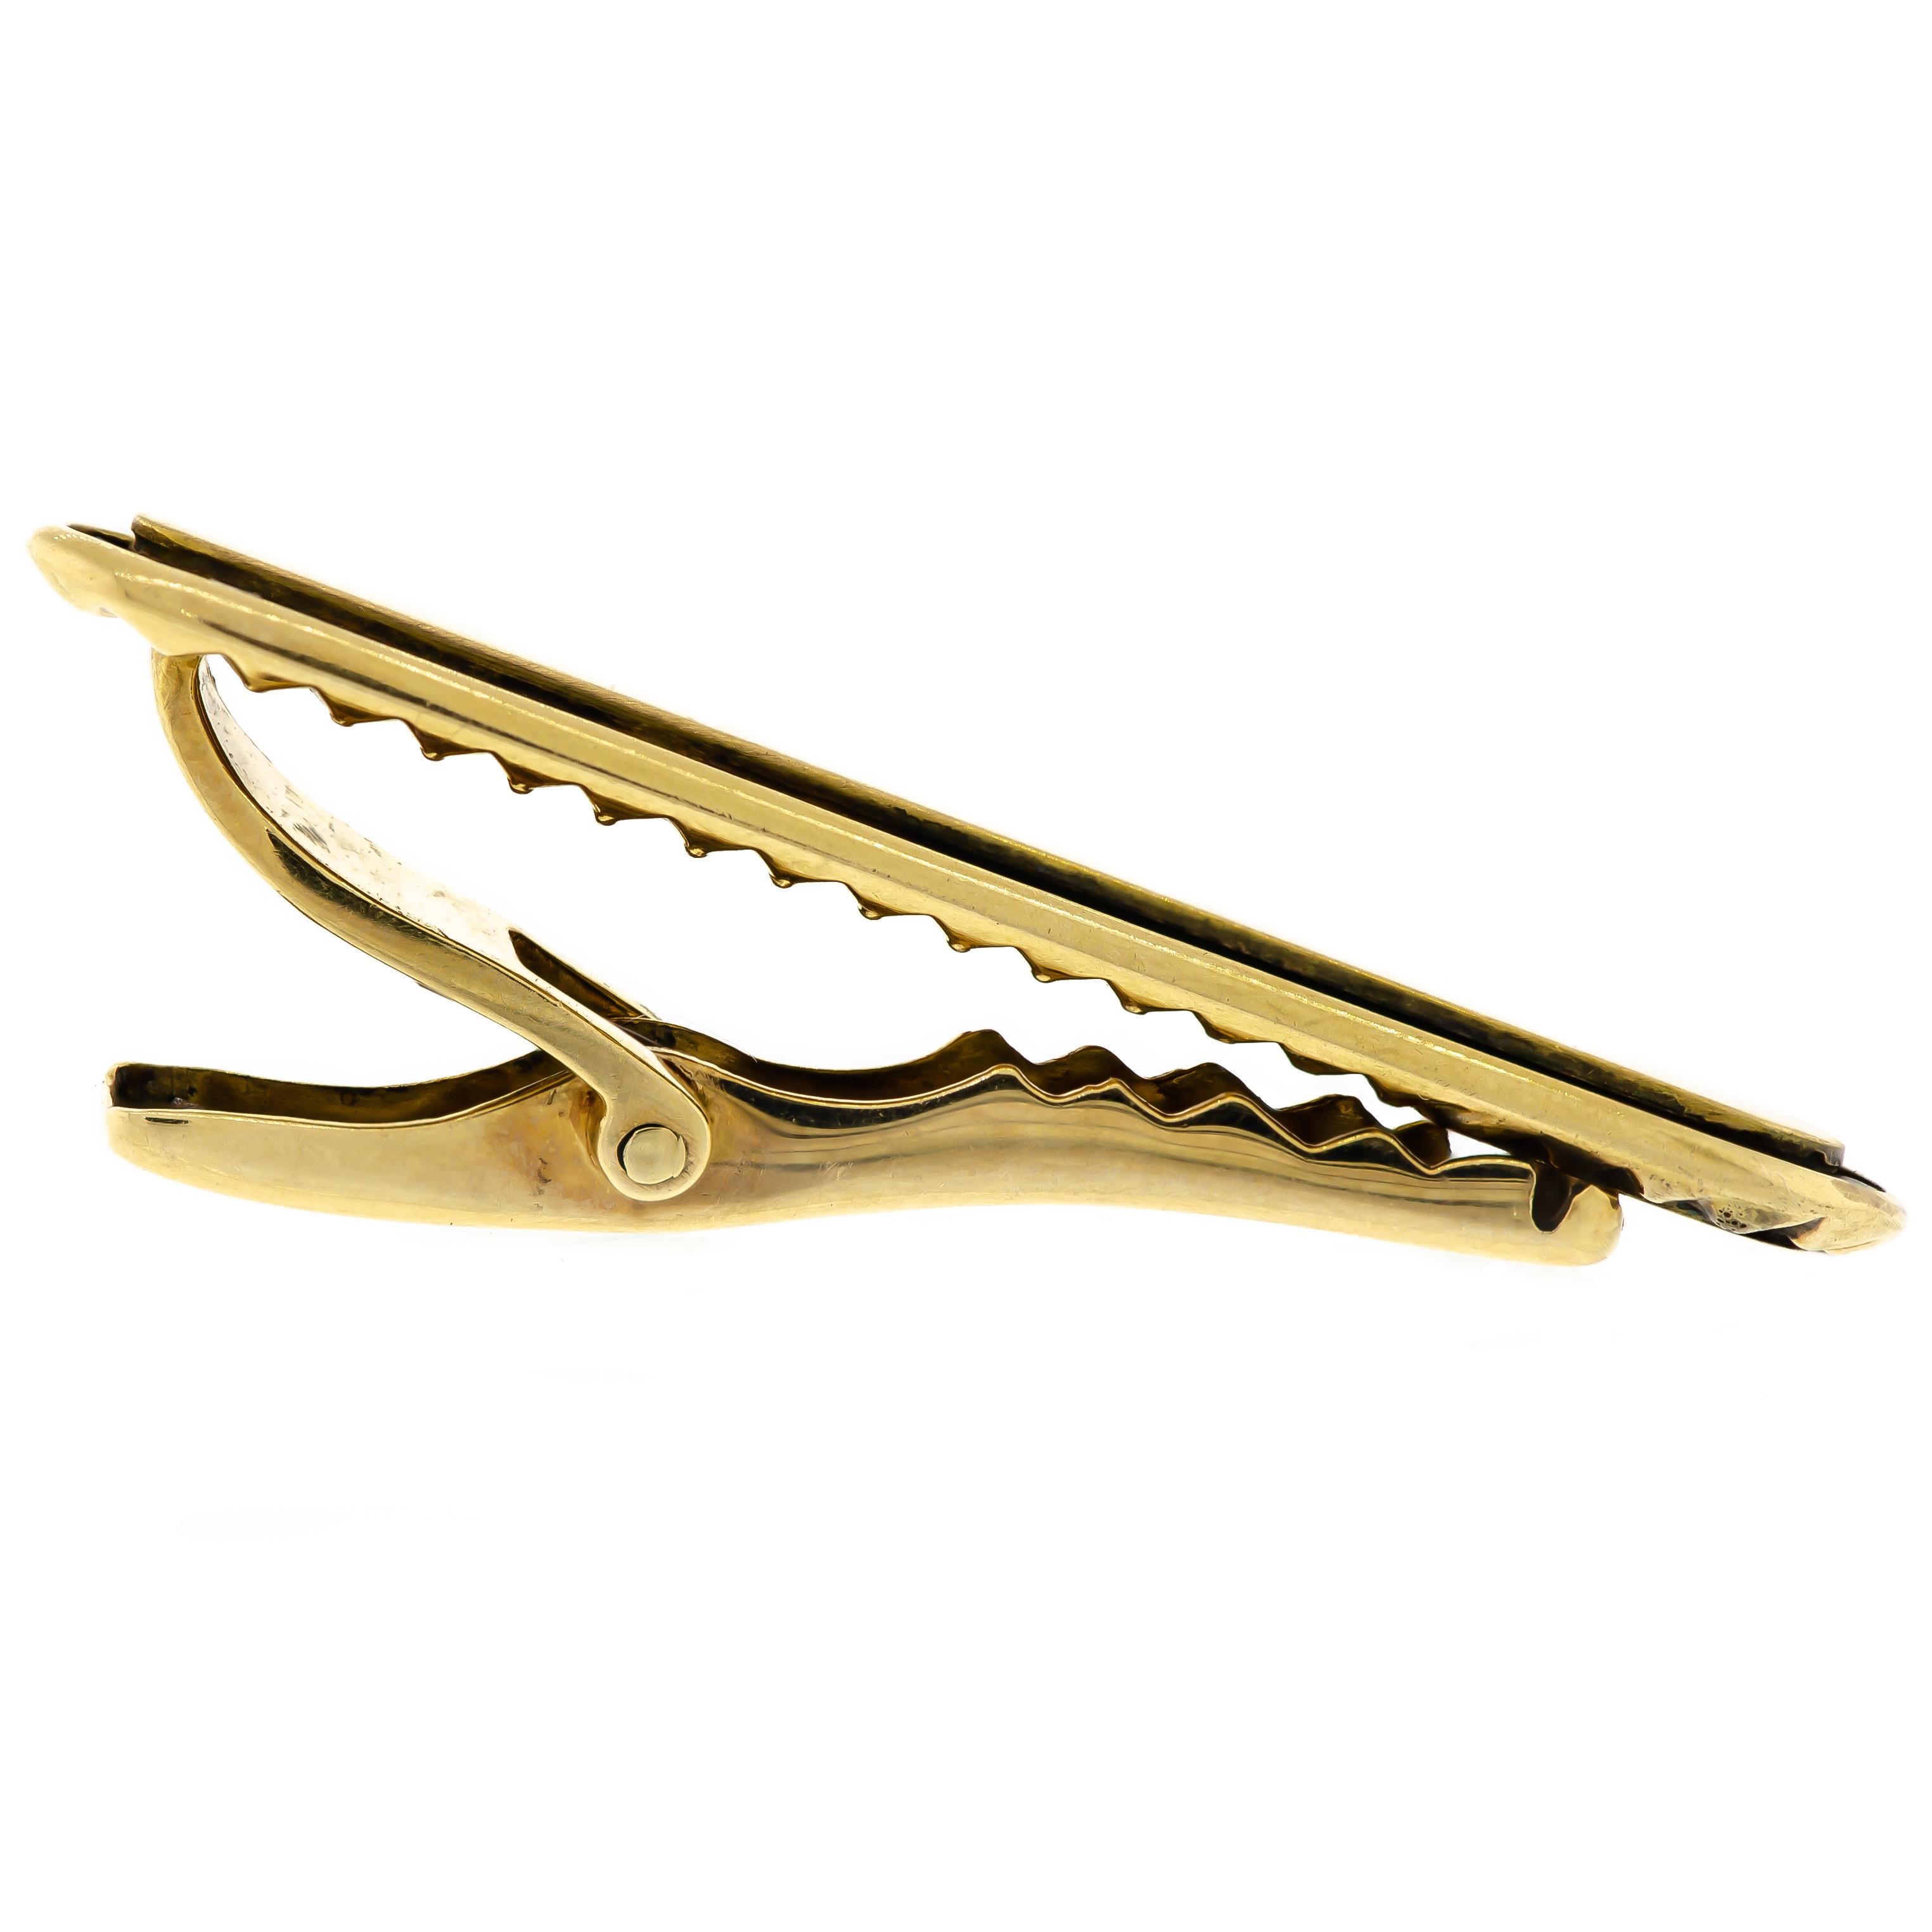 Attractive Mid Century Garnet 14K yellow gold tie clip by Lucien Piccard (trademark along with quality mark) in excellent condition border of deep red garnets set in matte brushed finish 14k yellow gold mount - 1 5/8 inches in length -  reverse gold